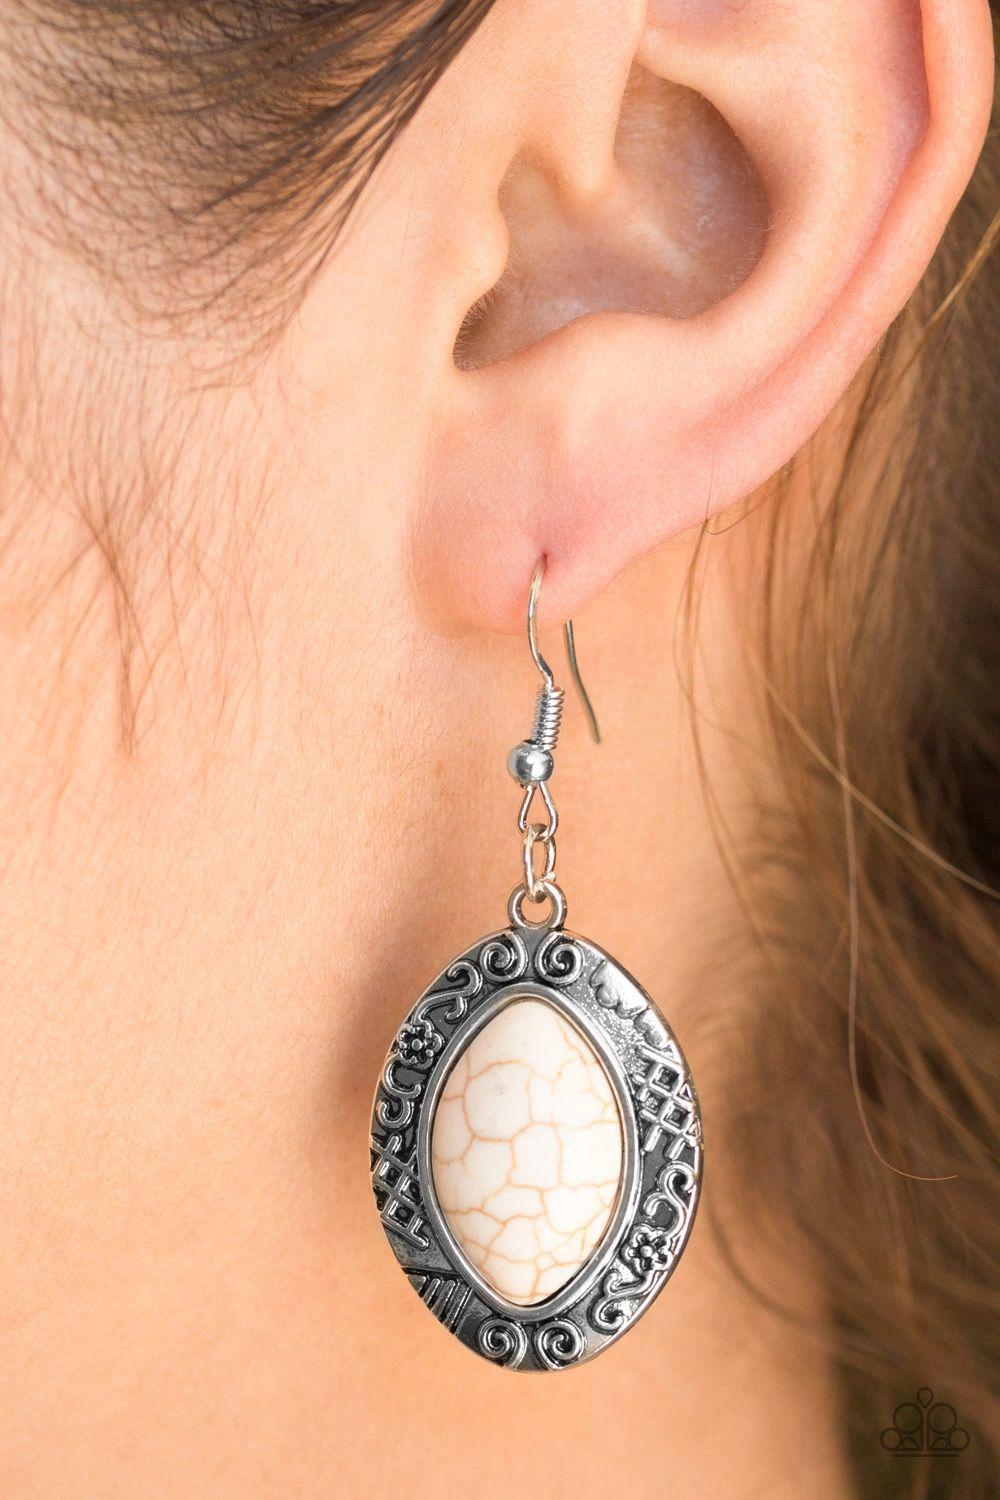 Desert Harvest White Stone Earrings - Paparazzi Accessories - model -CarasShop.com - $5 Jewelry by Cara Jewels